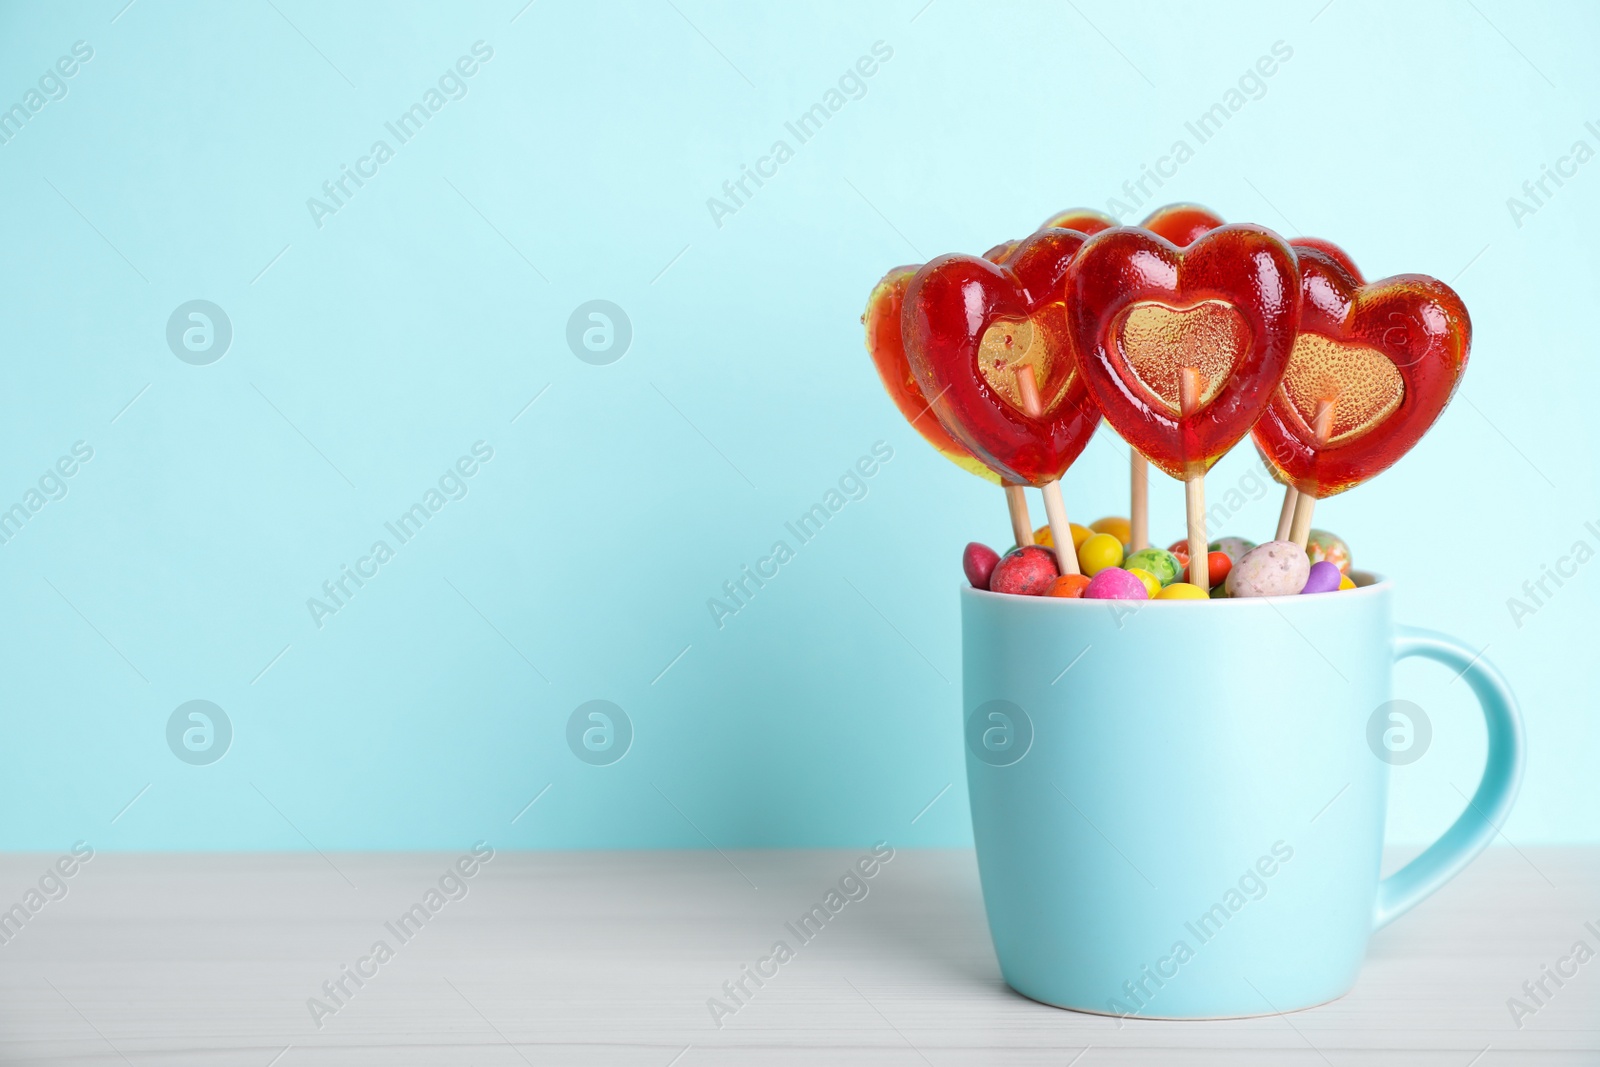 Photo of Delicious heart shaped lollipops and dragees on table against light blue background. Space for text